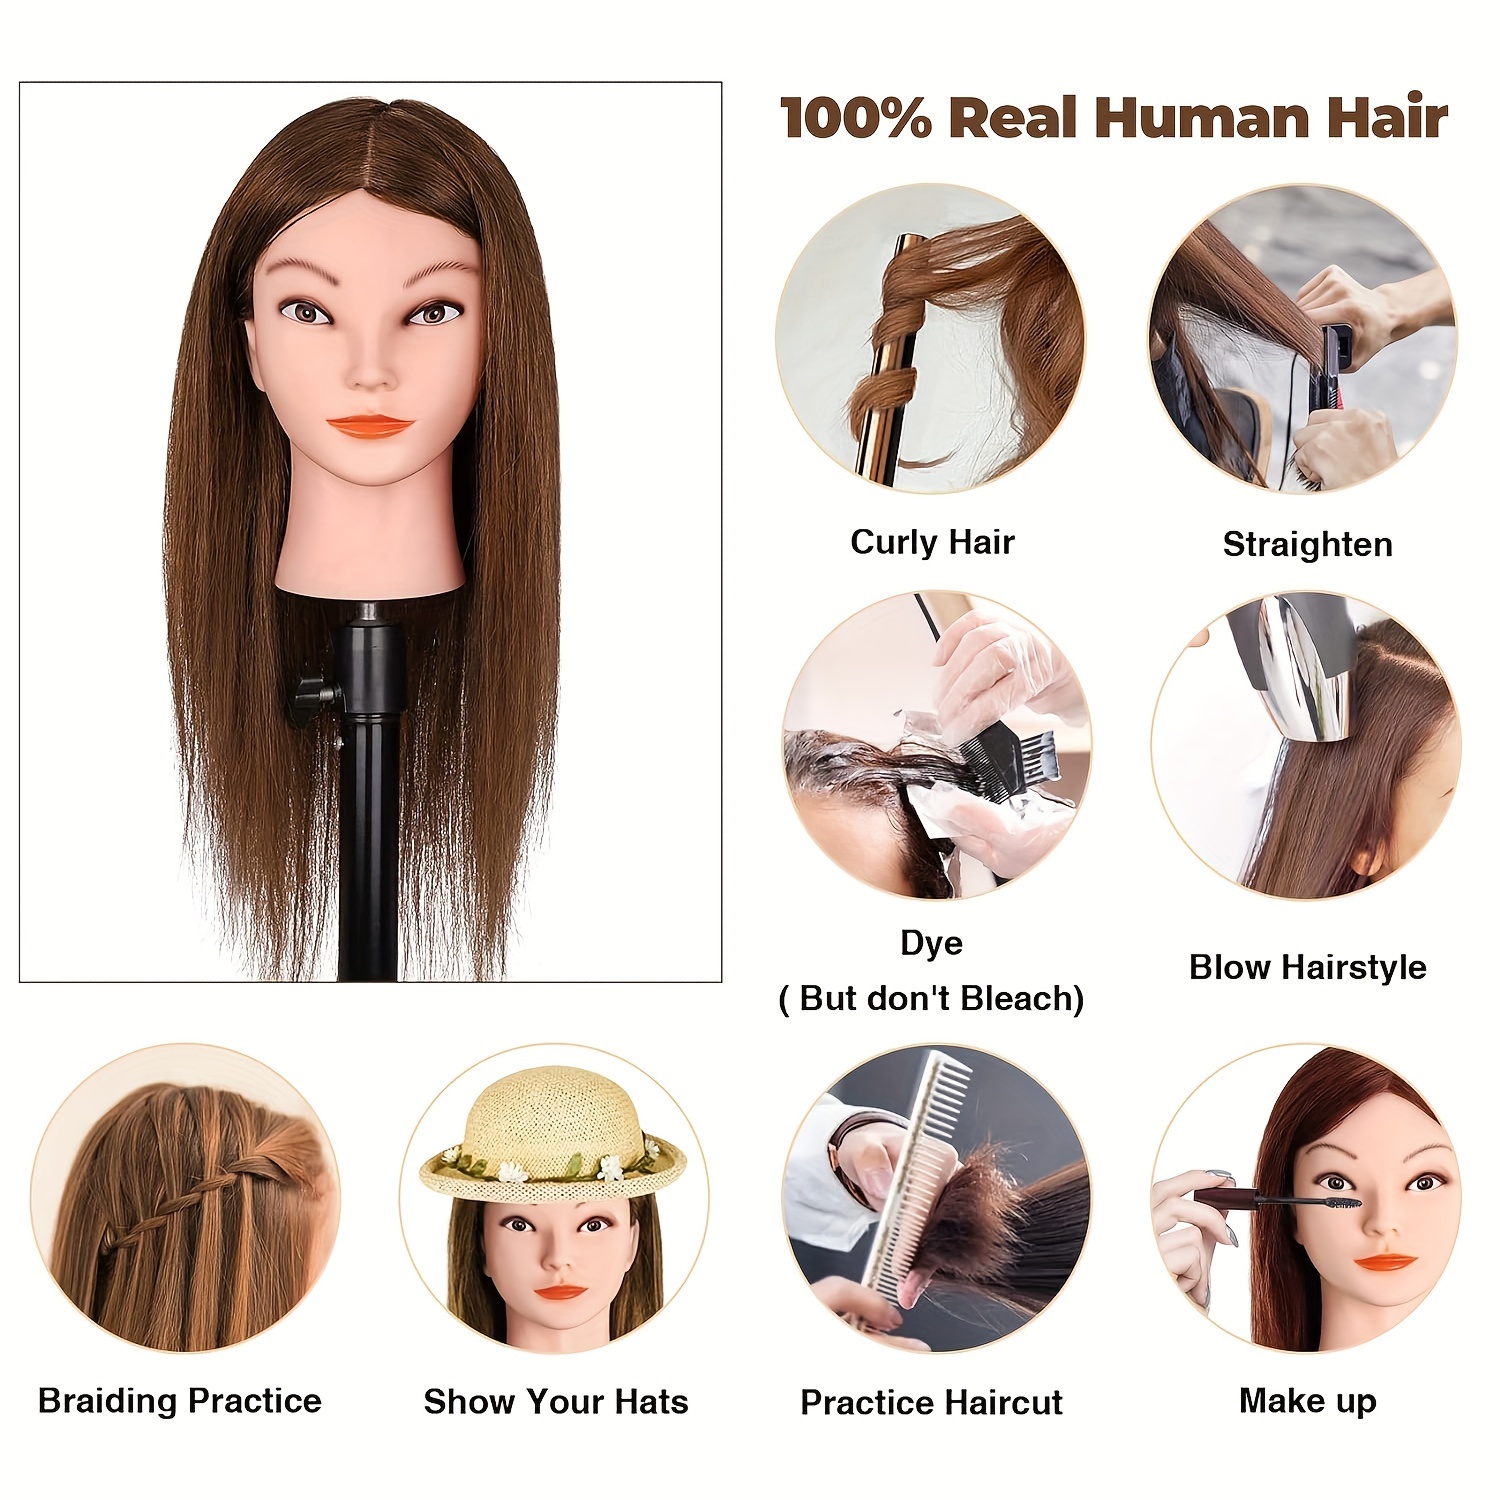 1pc Mannequin Head With 100% Real Hair For Braiding, Hair Styling Practice  With 1pc Stand